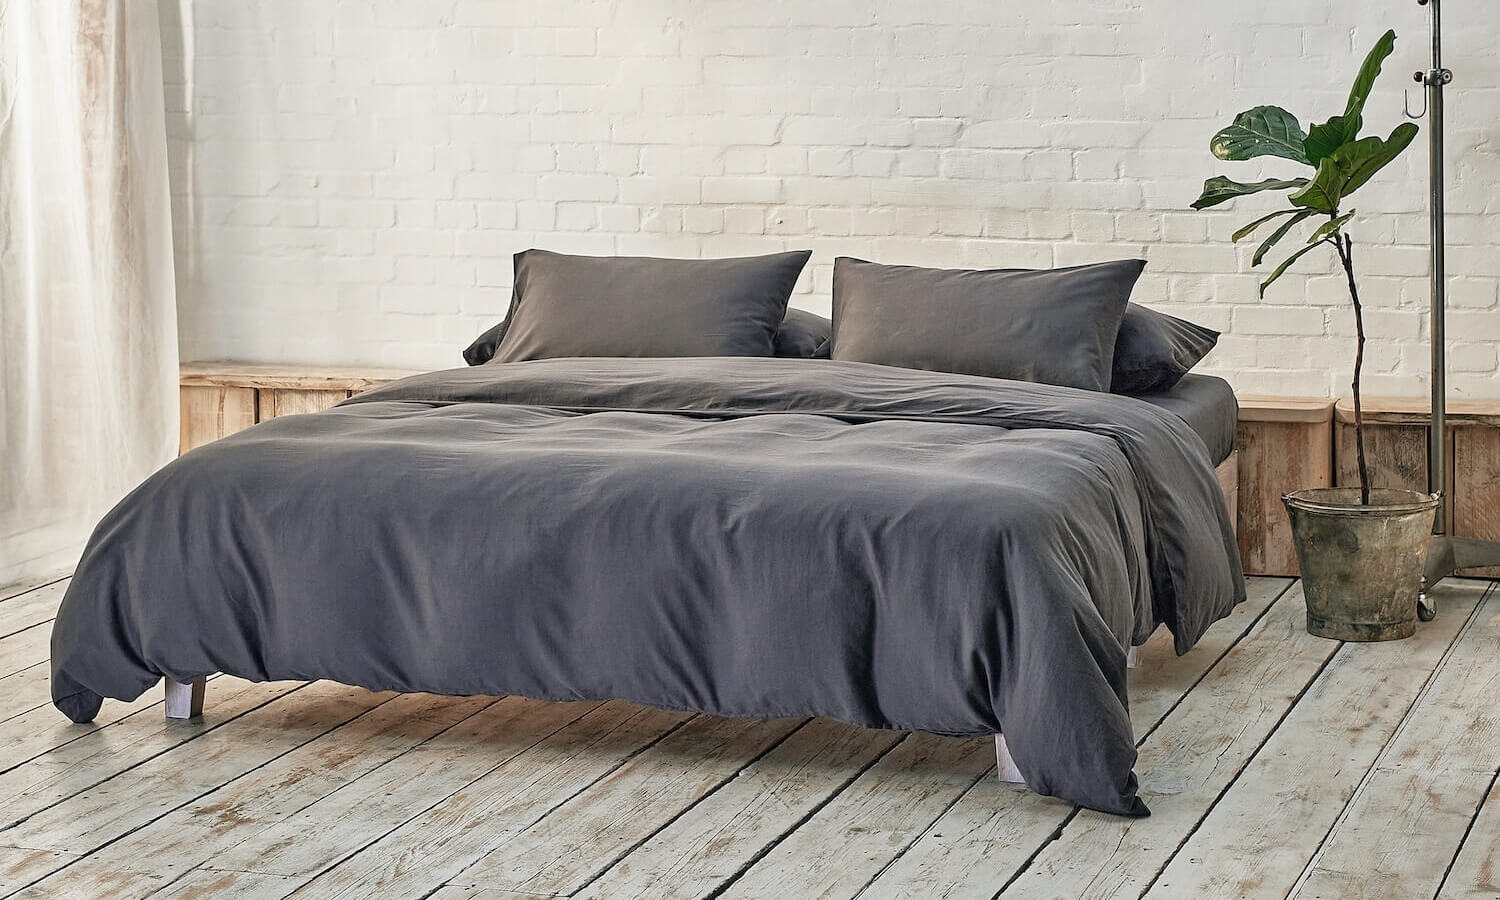 dark grey duvet cover, two pillowcases, and bottom sheet on double bed in apartment with plant and wooden flooring